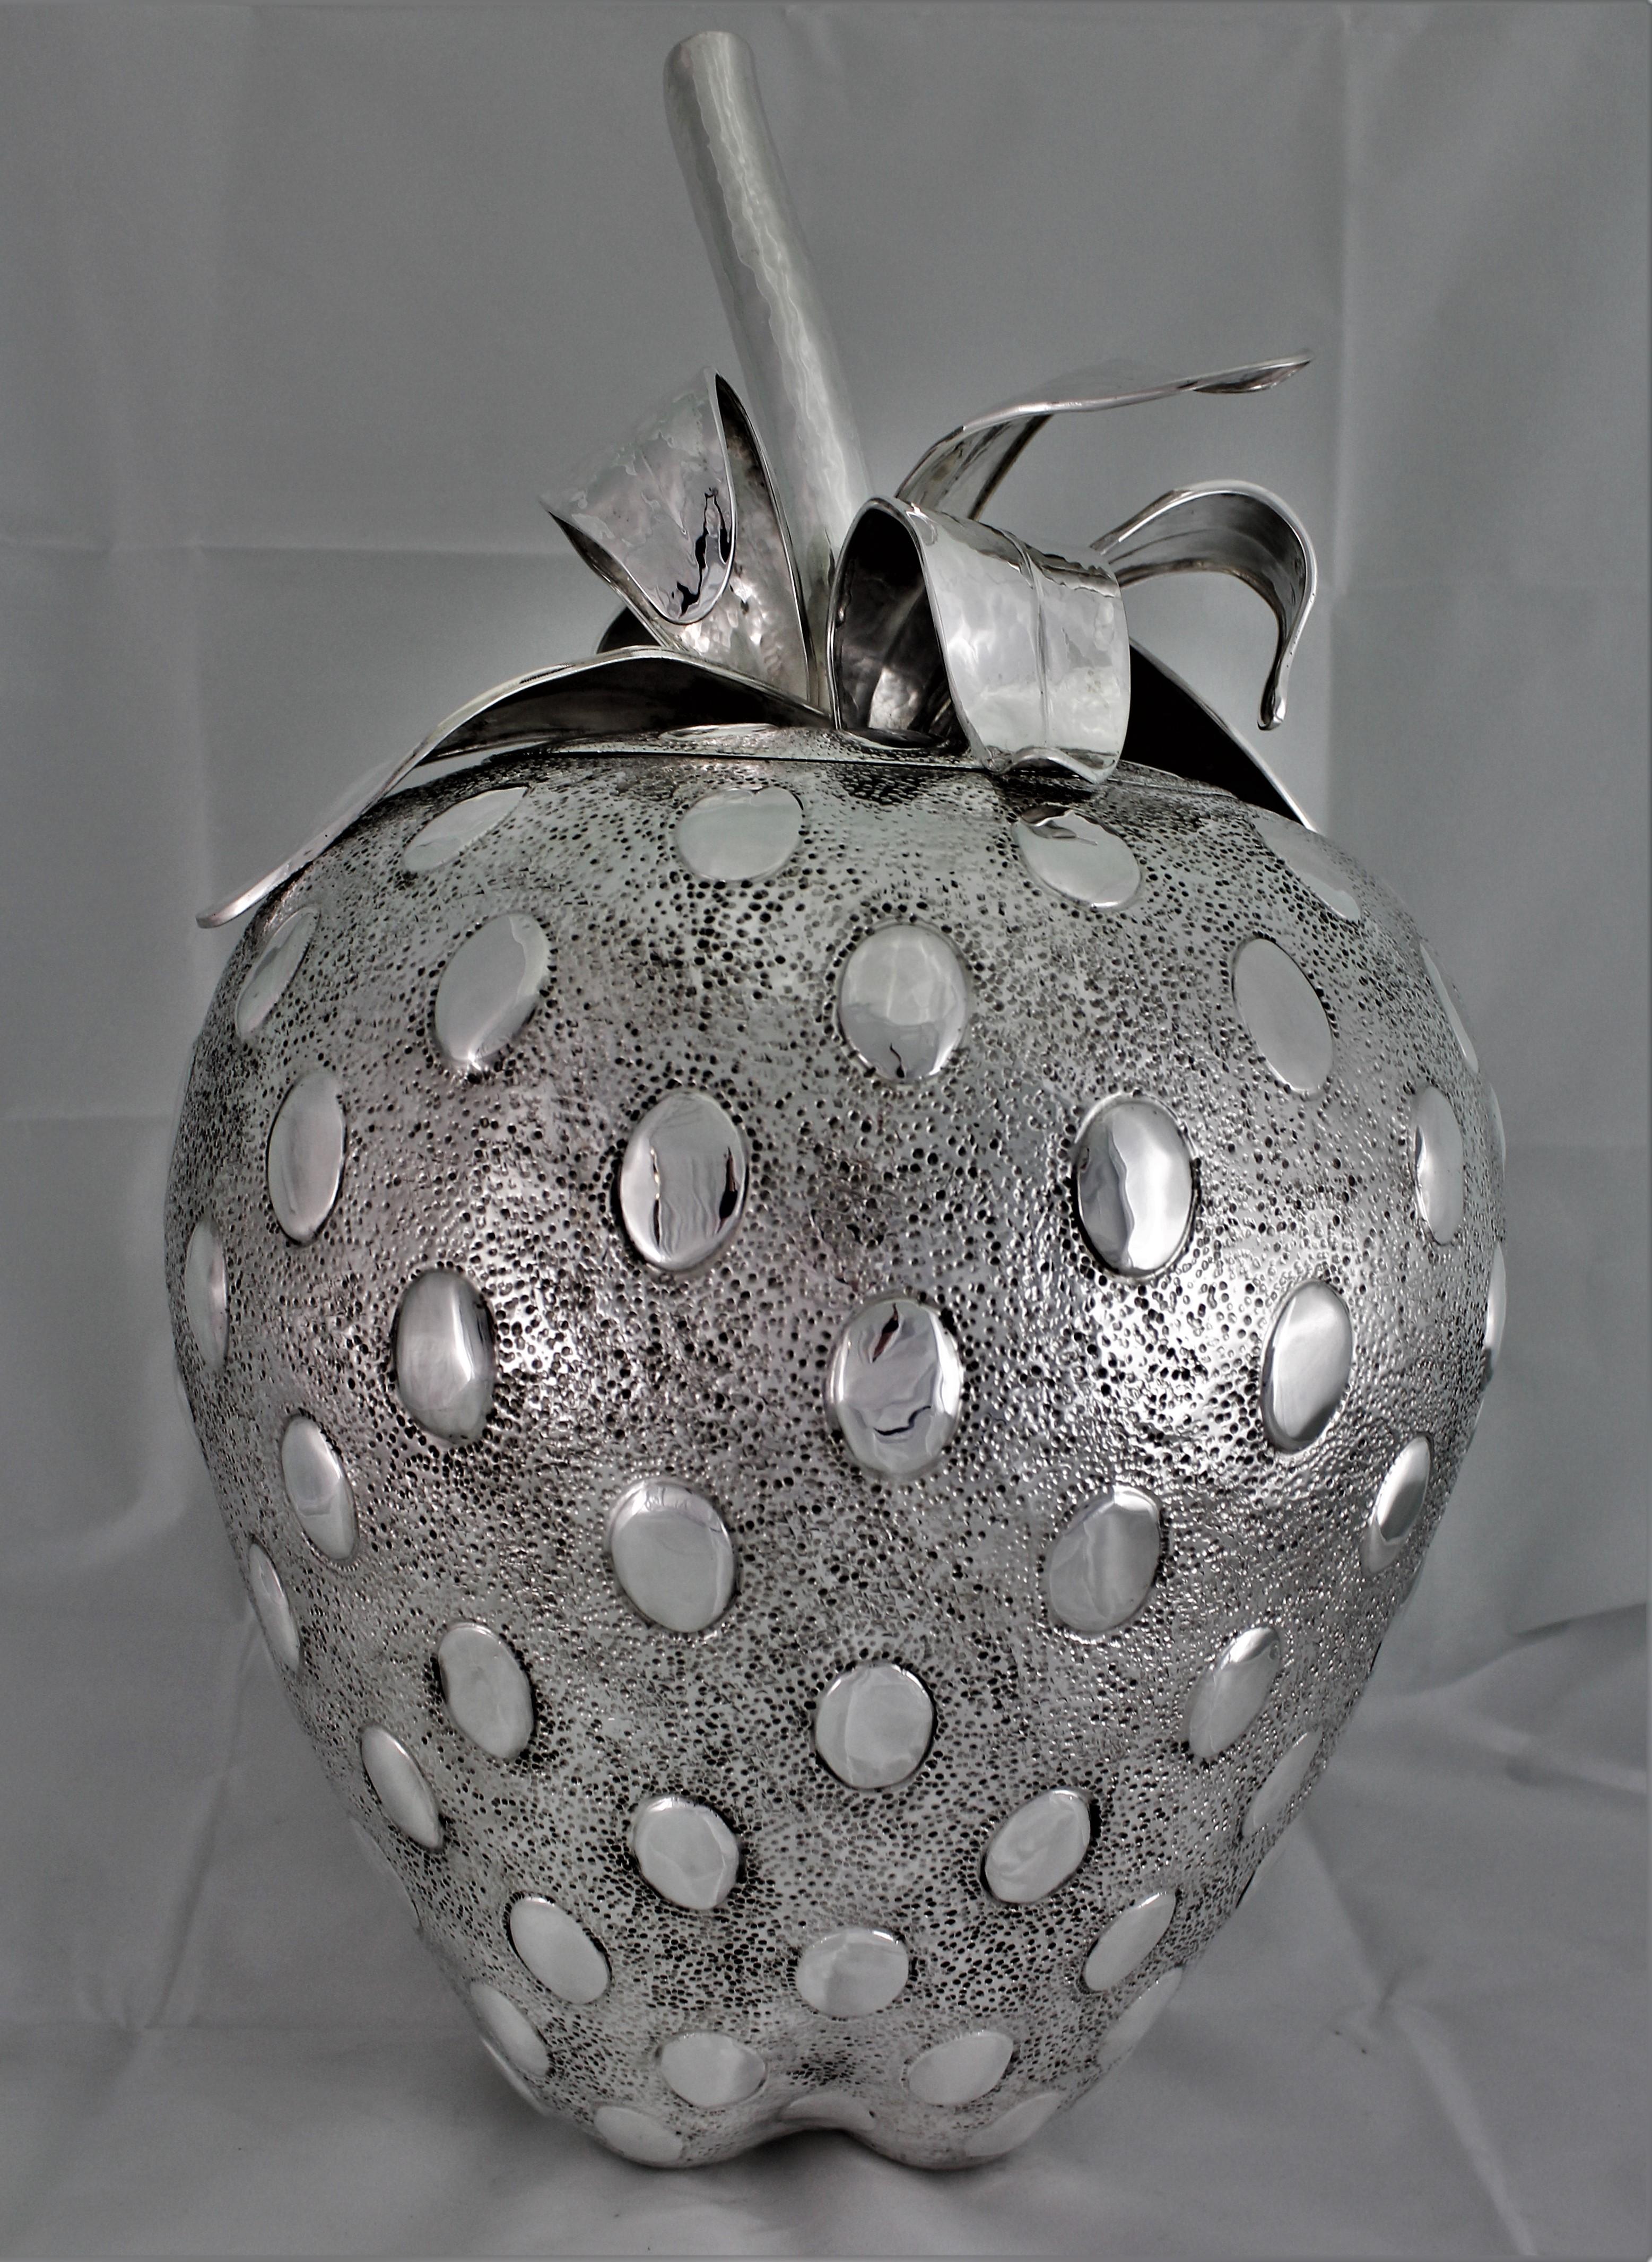 Impressive embossed and engraved silver centerpiece strawberry shaped.

Entirely embossed and shaped by hand, beautifully engraved in every detail like a real strawberry.

Upper part is a cover, with the strawberry leaves and stem as